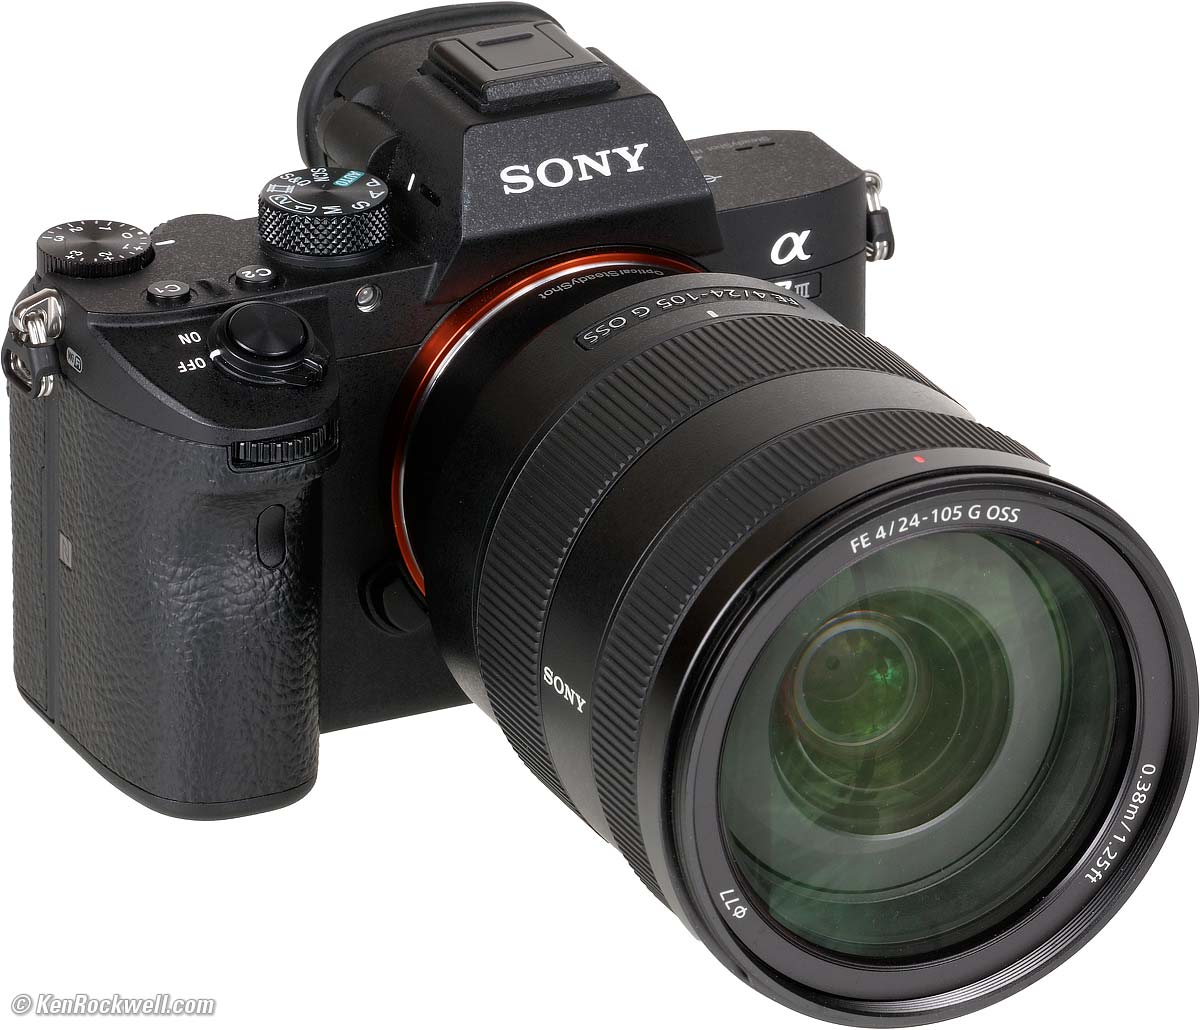 Sony Iii Review